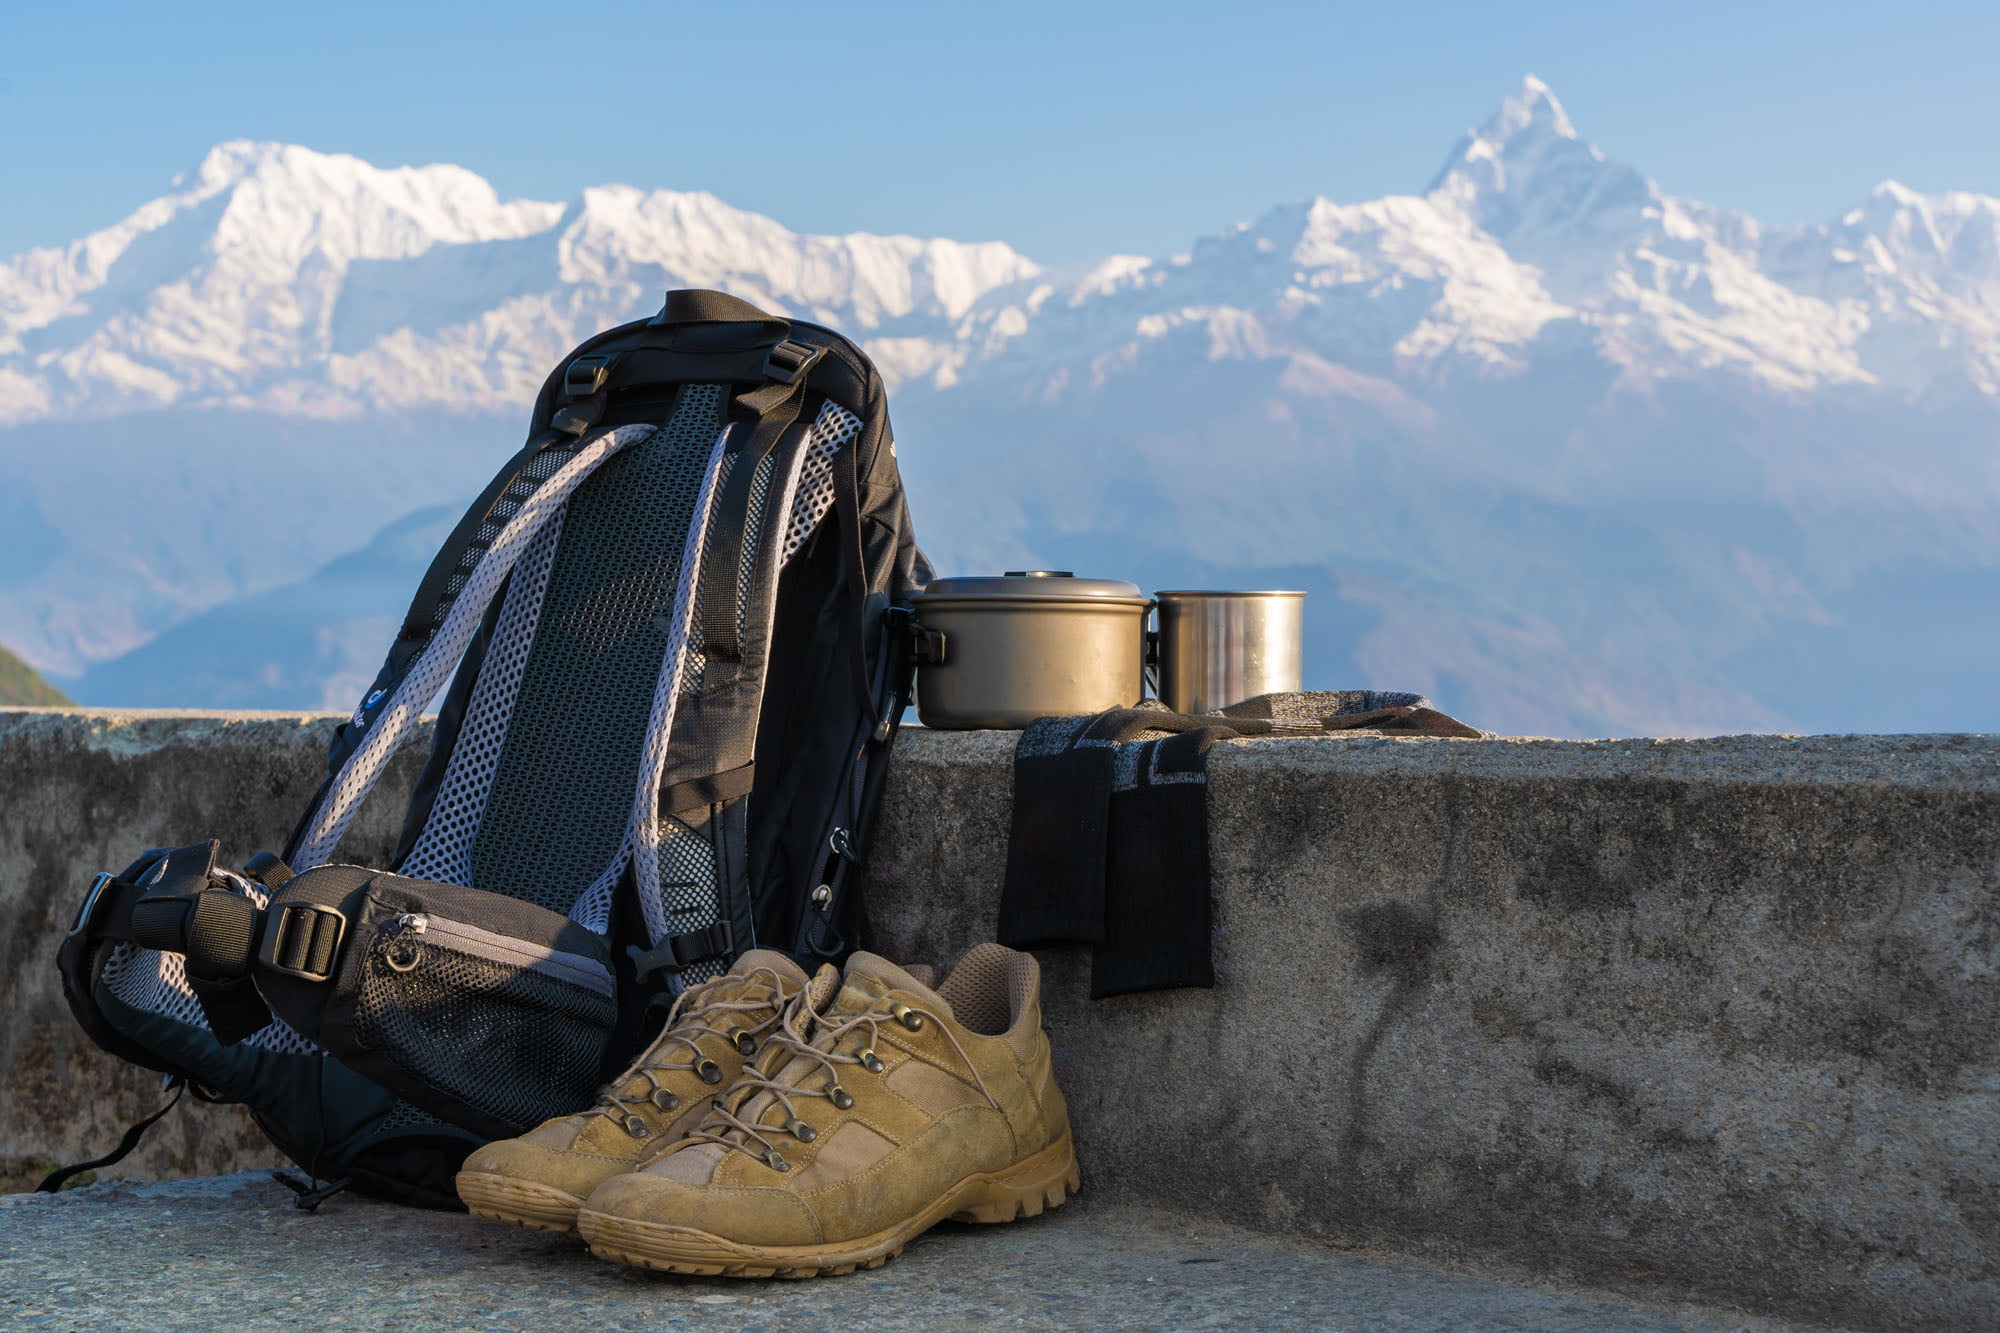 The Ultimate Guide to the Annapurna Circuit Trek: Exploring the Costs and Budgeting Tips